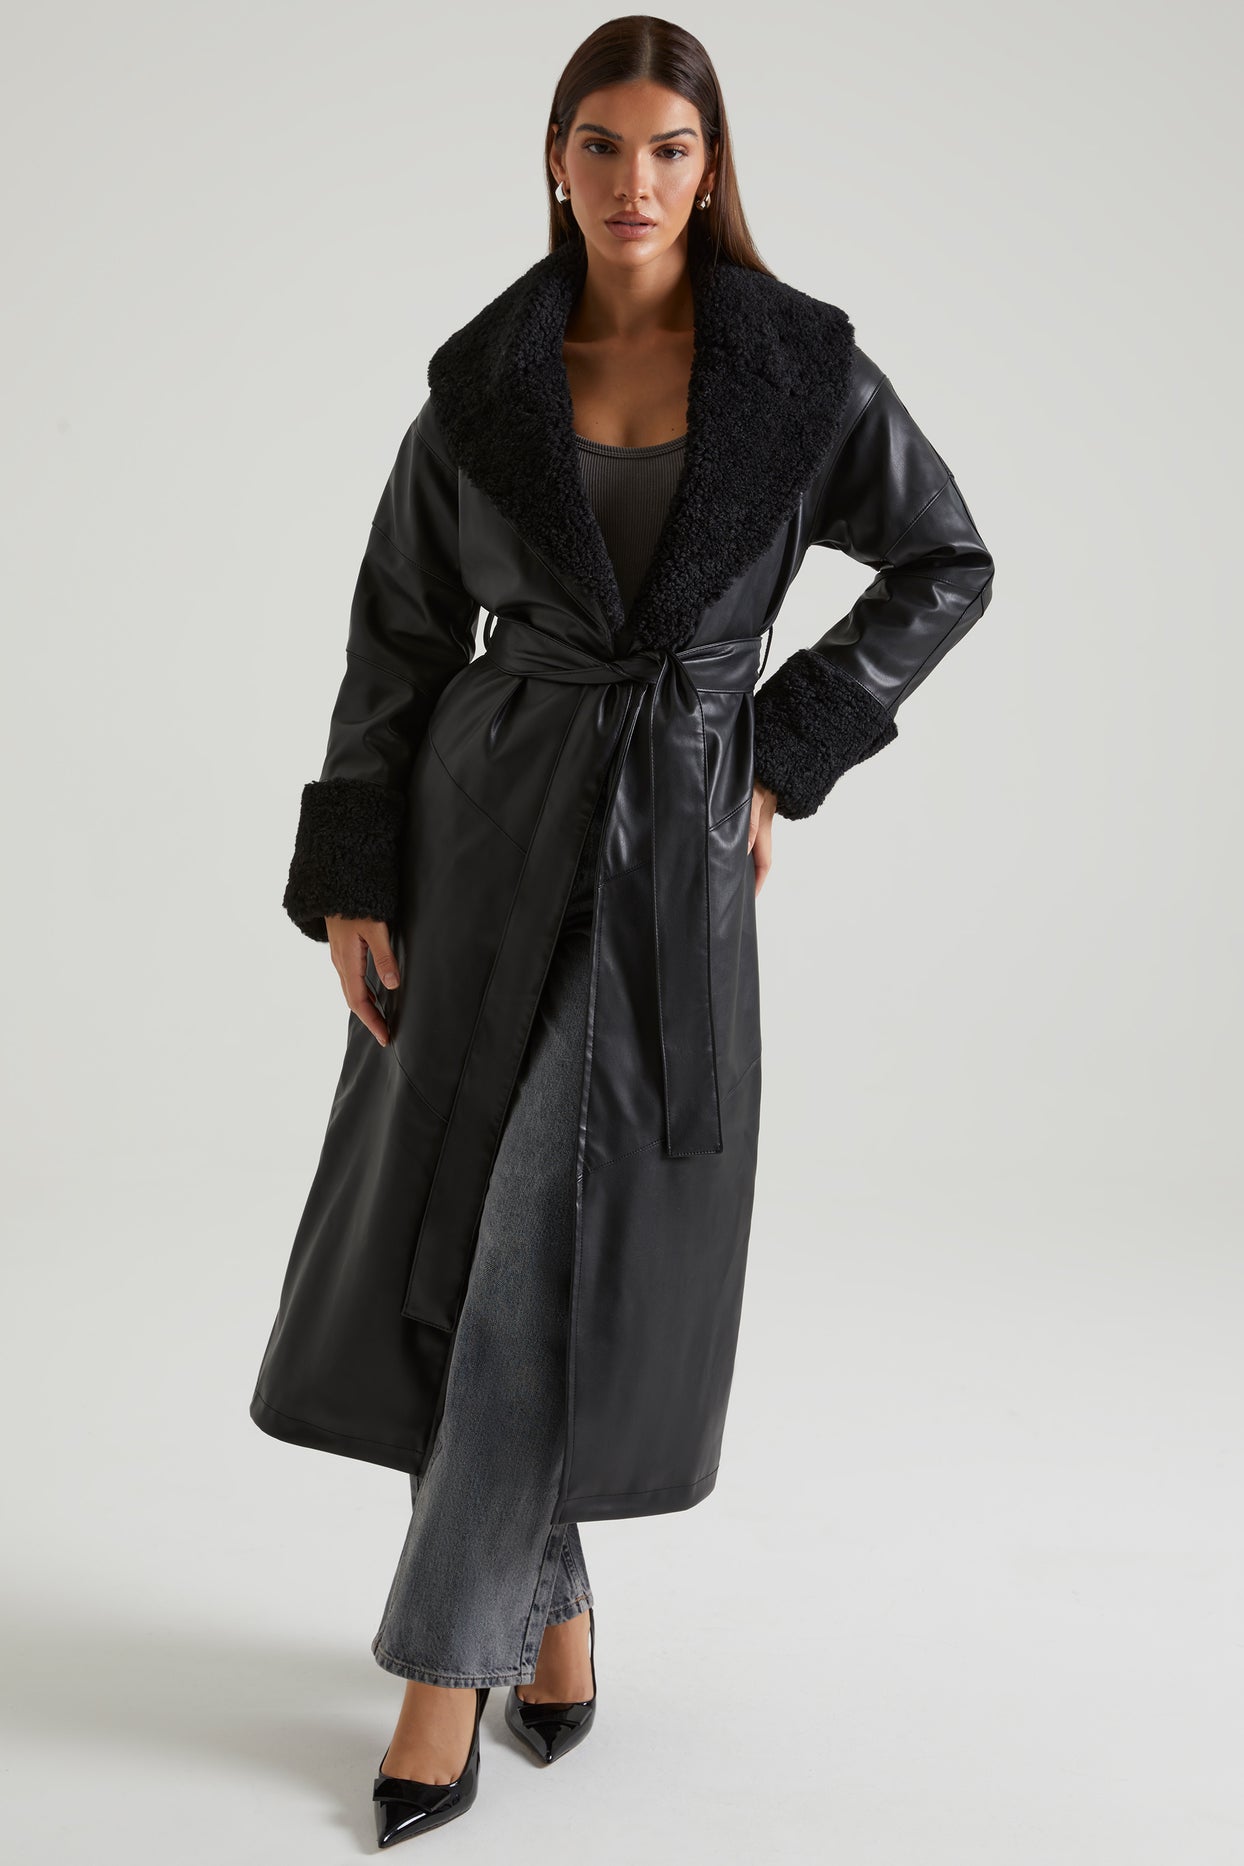 Lumi Tie Up Coat with Shearling Collar and Cuff in Black | Oh Polly